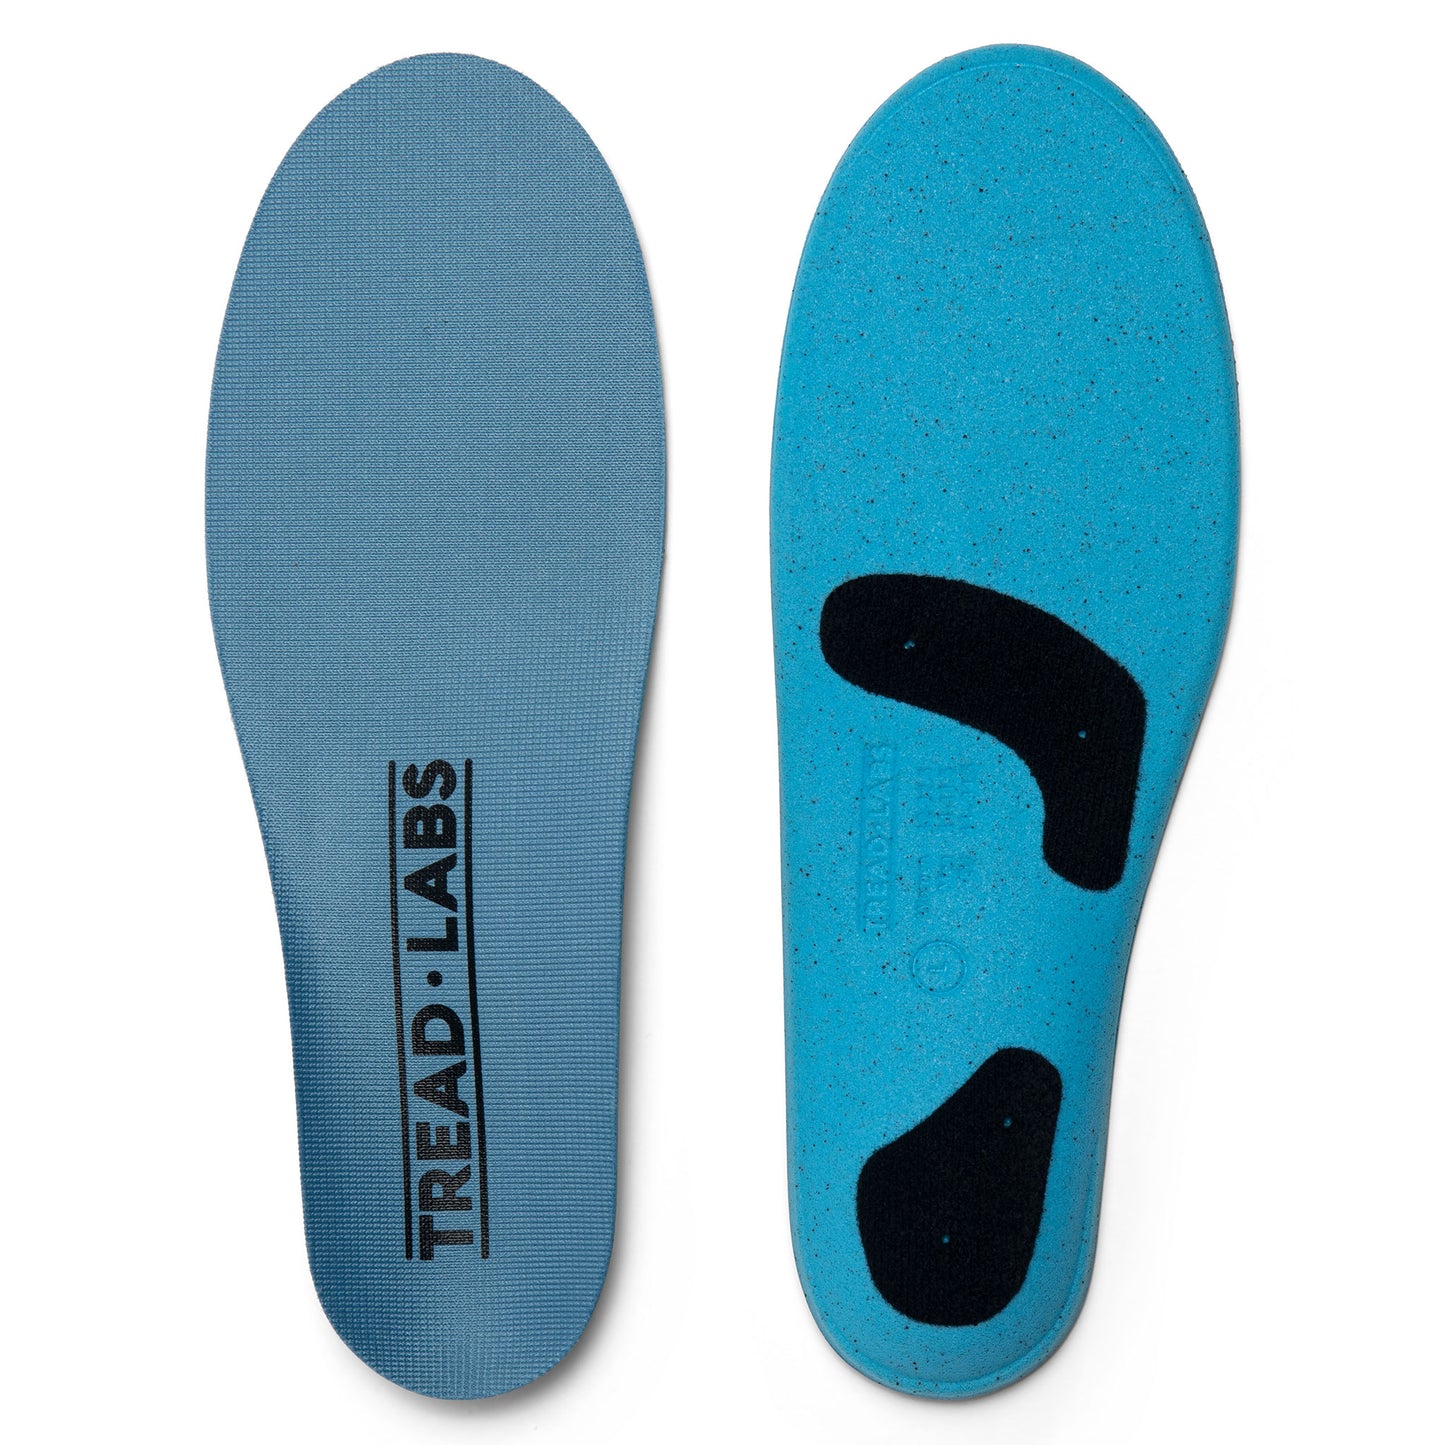 Pace Insole Replacement Top Covers From Tread Labs